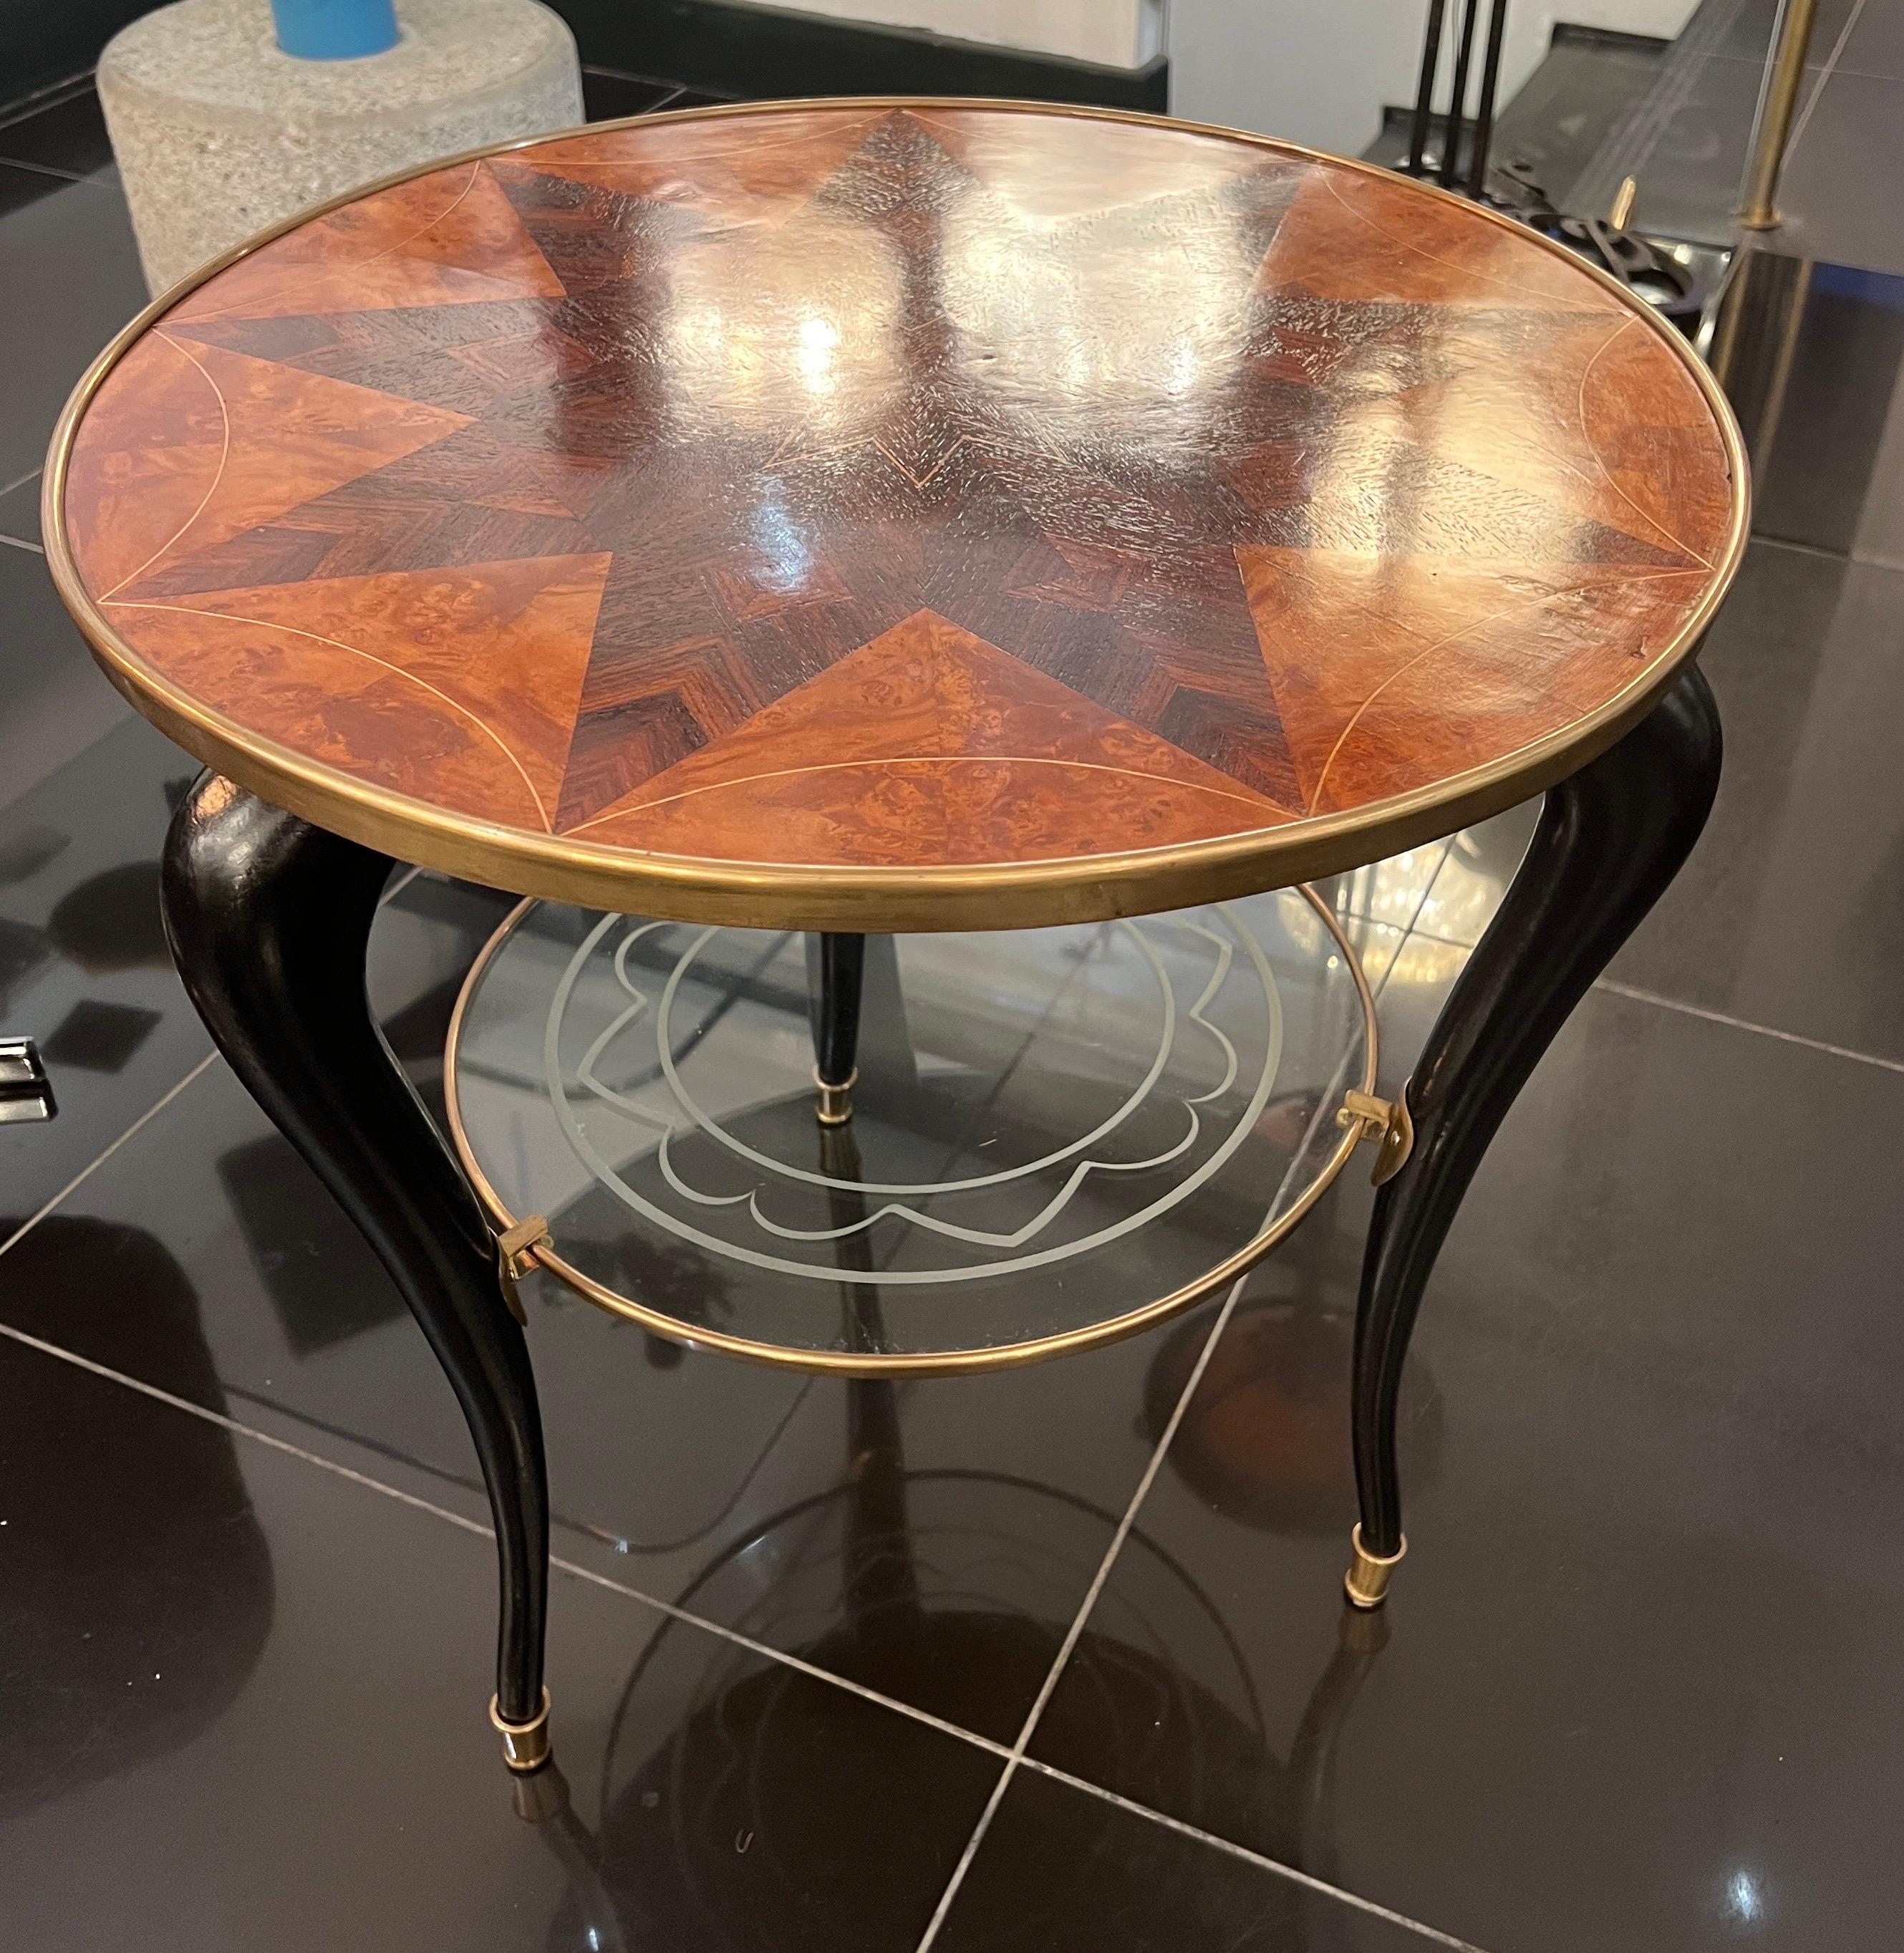 A fabulous Italian two tiered circular side table with beautiful  walnut marquetry design on top surrounded by a brass frame .. The lower section is etched glass also supported by a brass frame . There’re three curved legs in black lacquer with